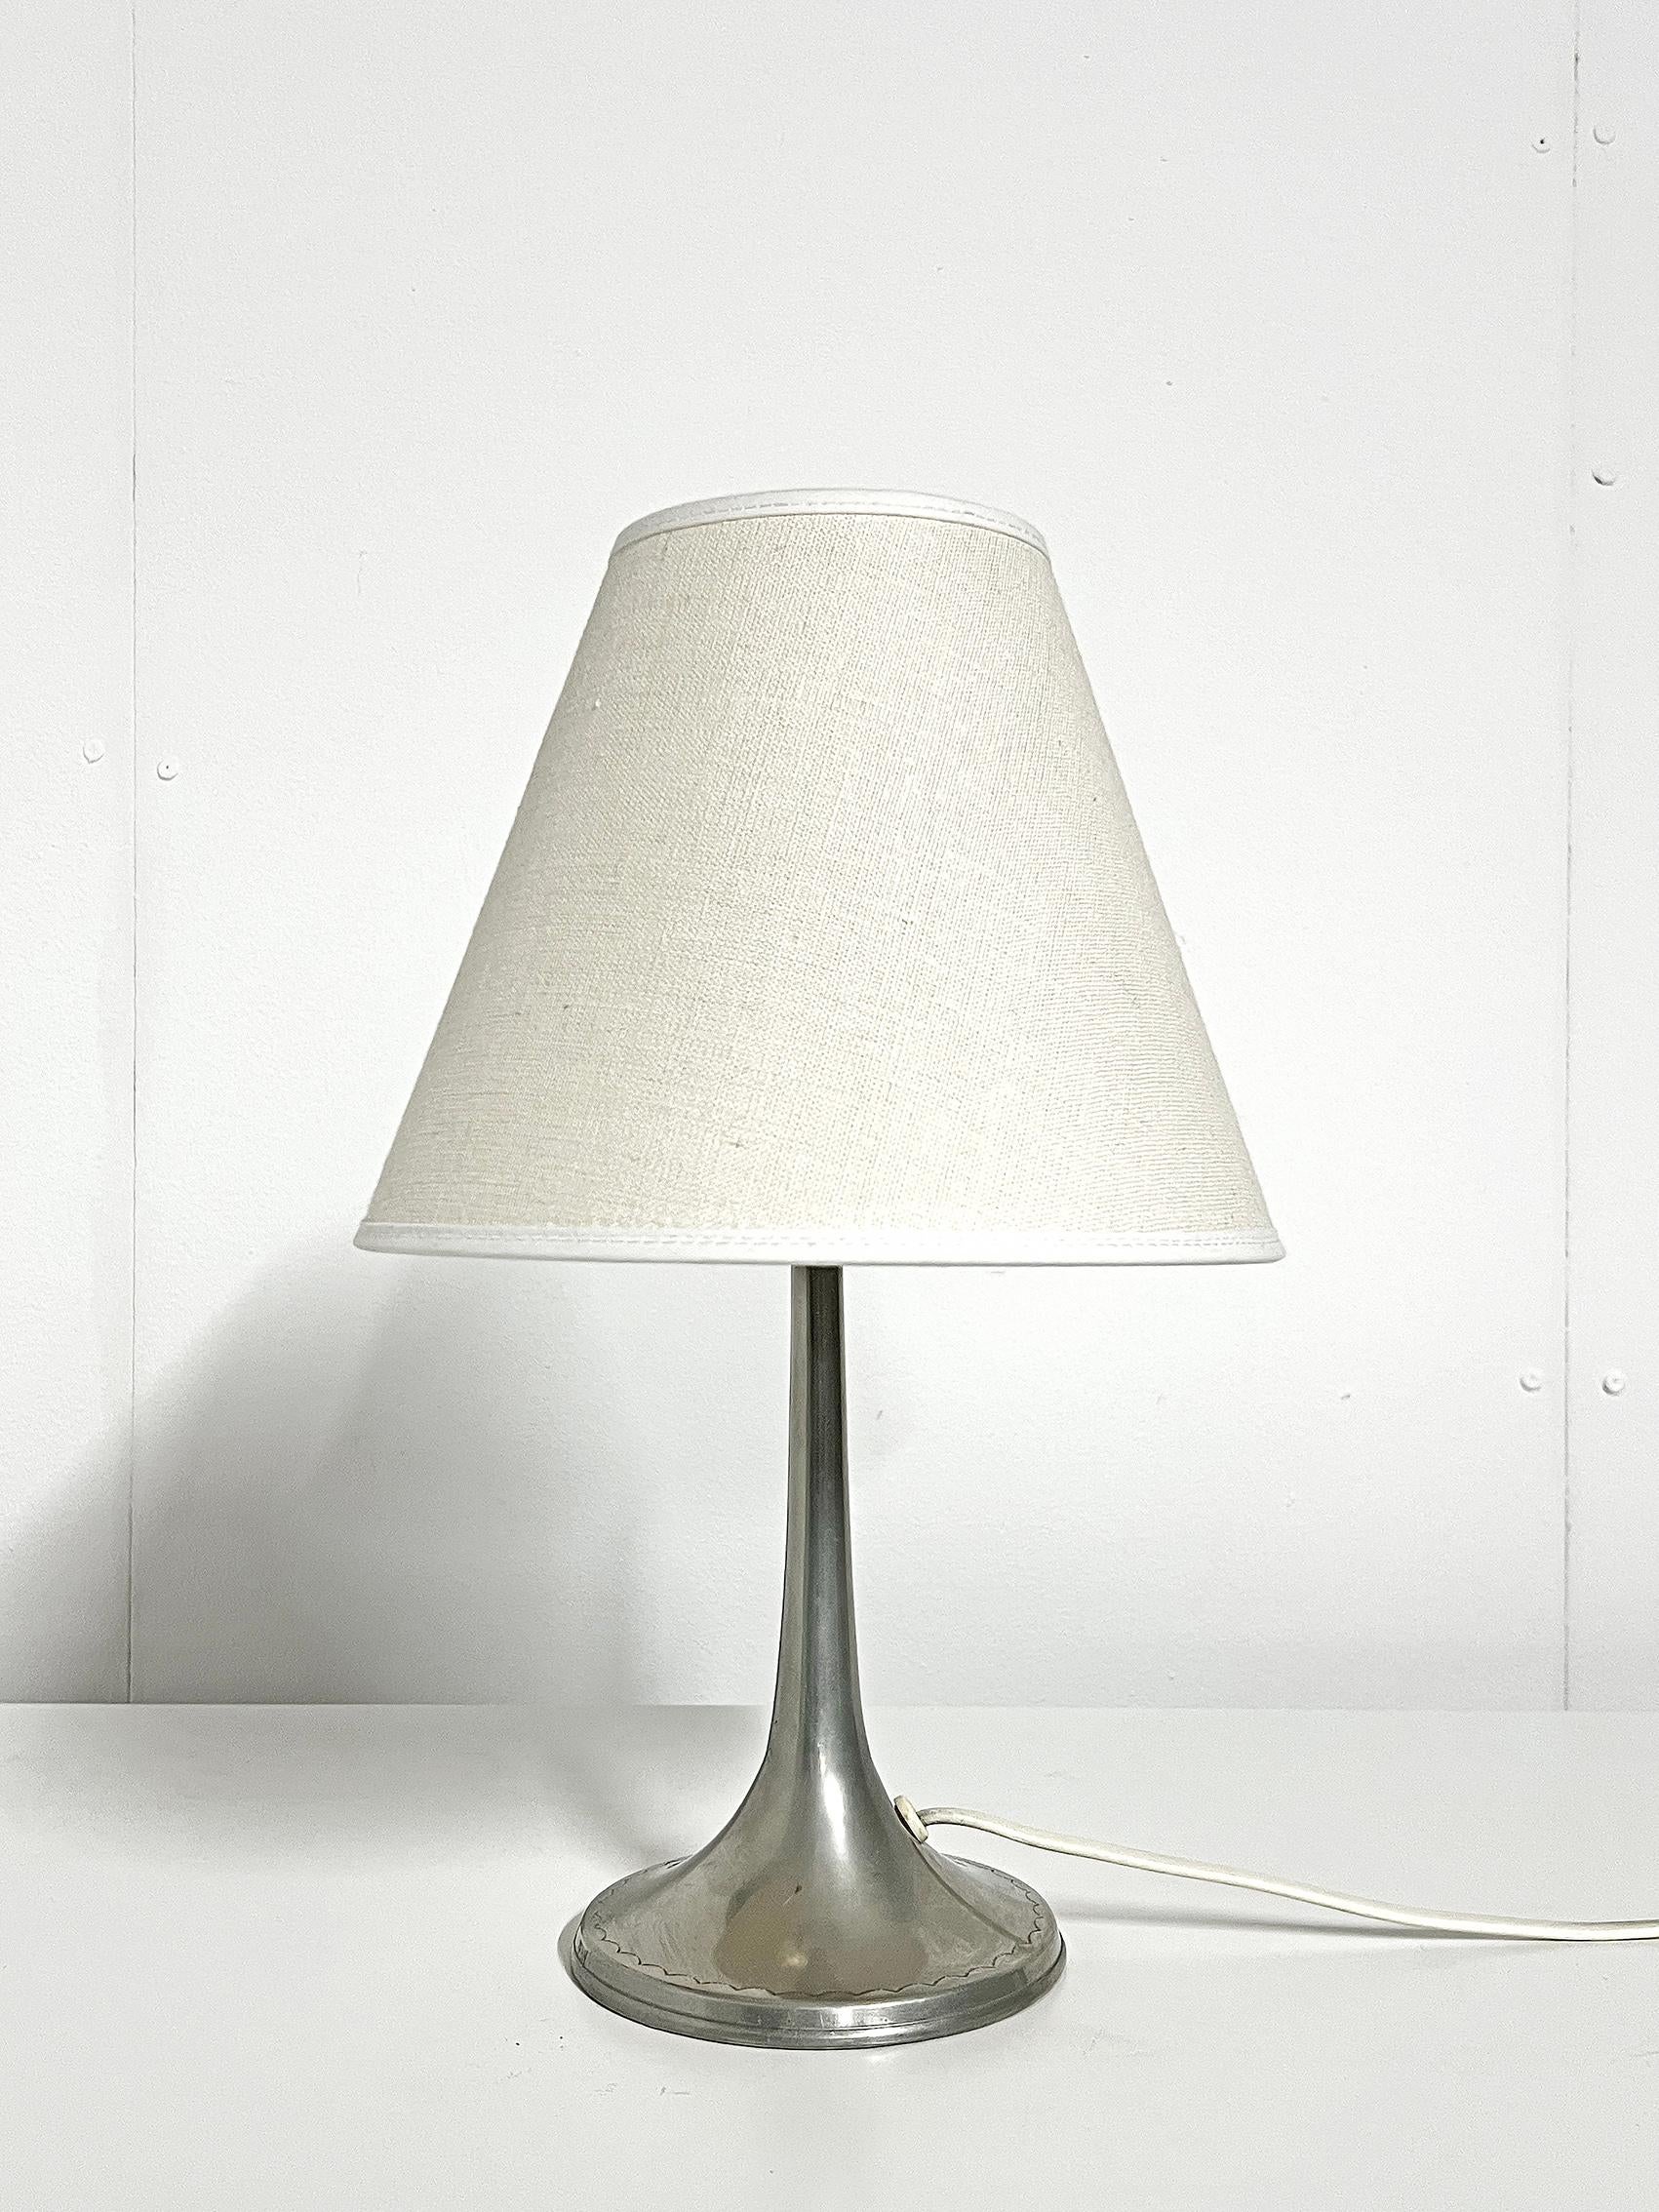 Rare, Scandinavian Modern table lamp in pewter by Thorild Knutsson -1930.
Marked with makers mark. 
Good vintage condition, wear and patina consistent with age and use. Scratches.
Please notice, the shade is not included!  
Original wiring. We